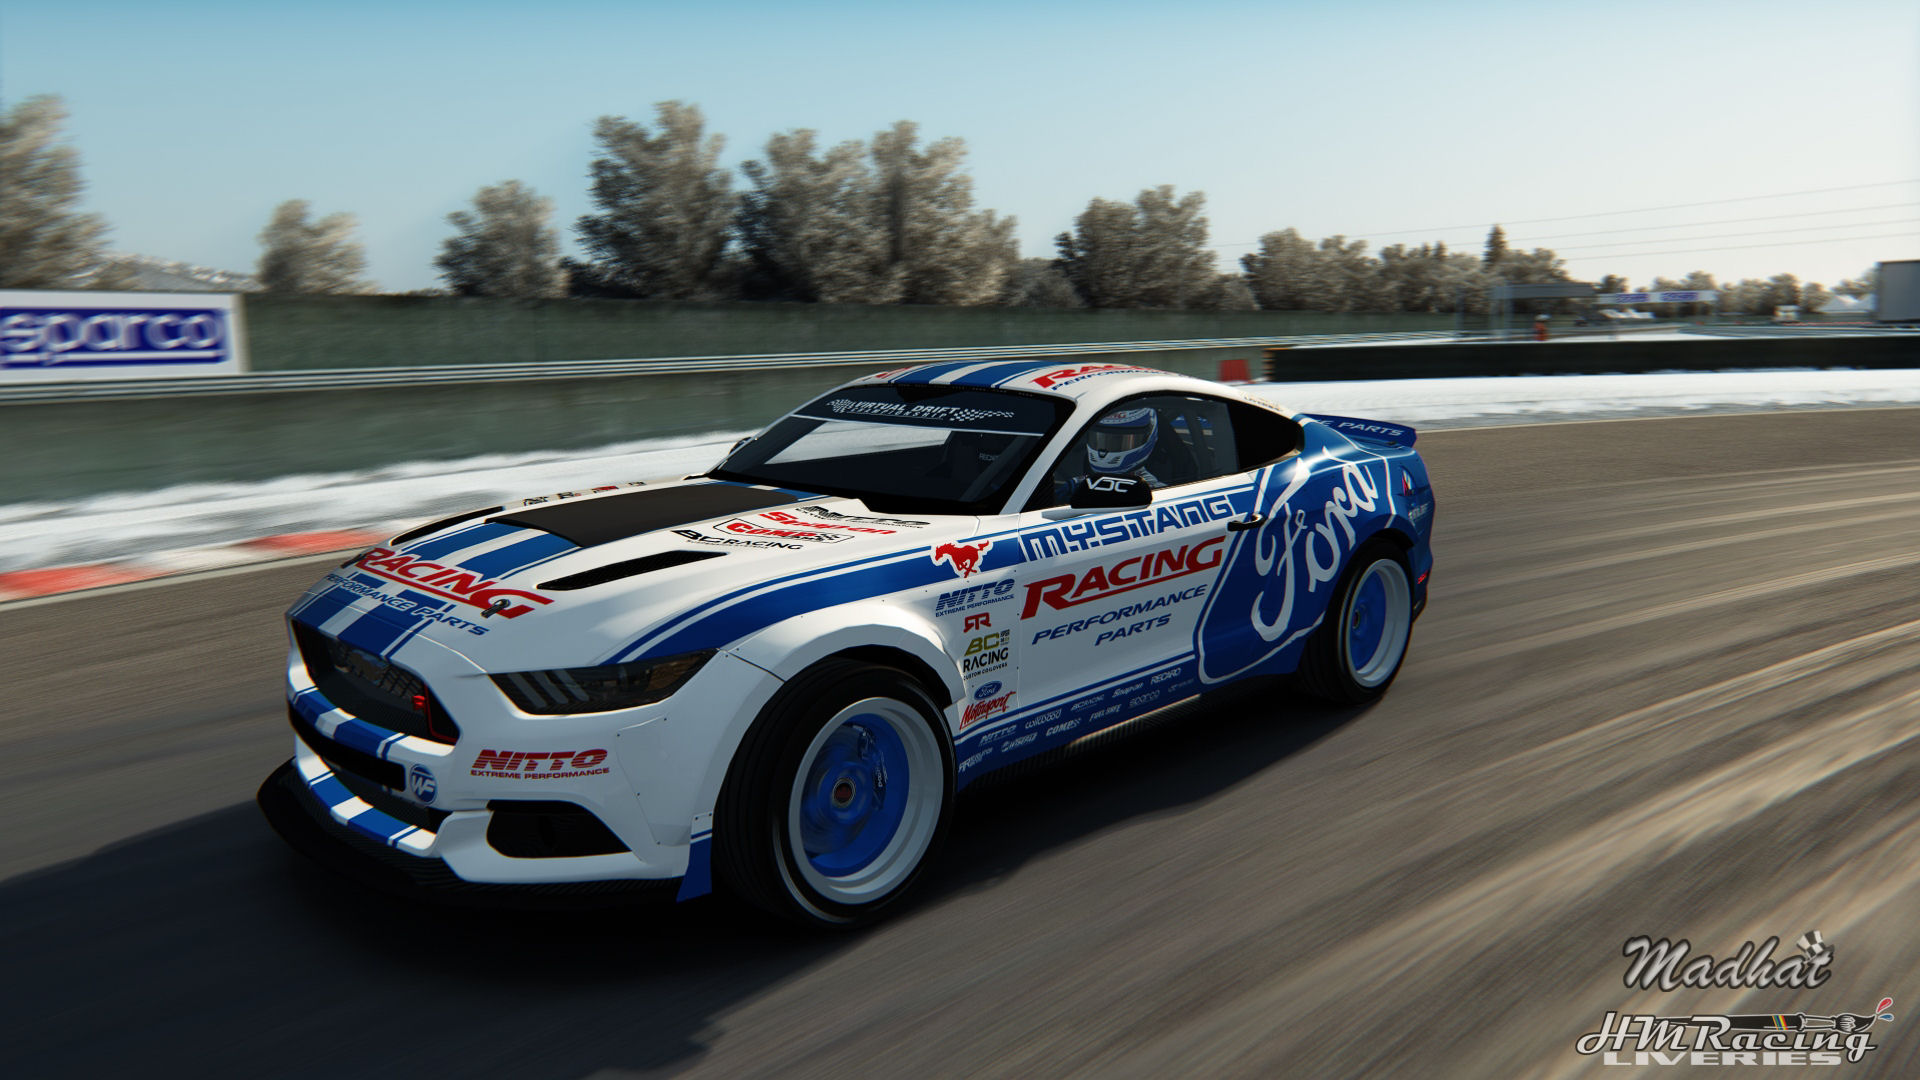 Ford Racing Performance Parts VDC RTR Mustang Madhat HMRacing Liveries 06.jpg